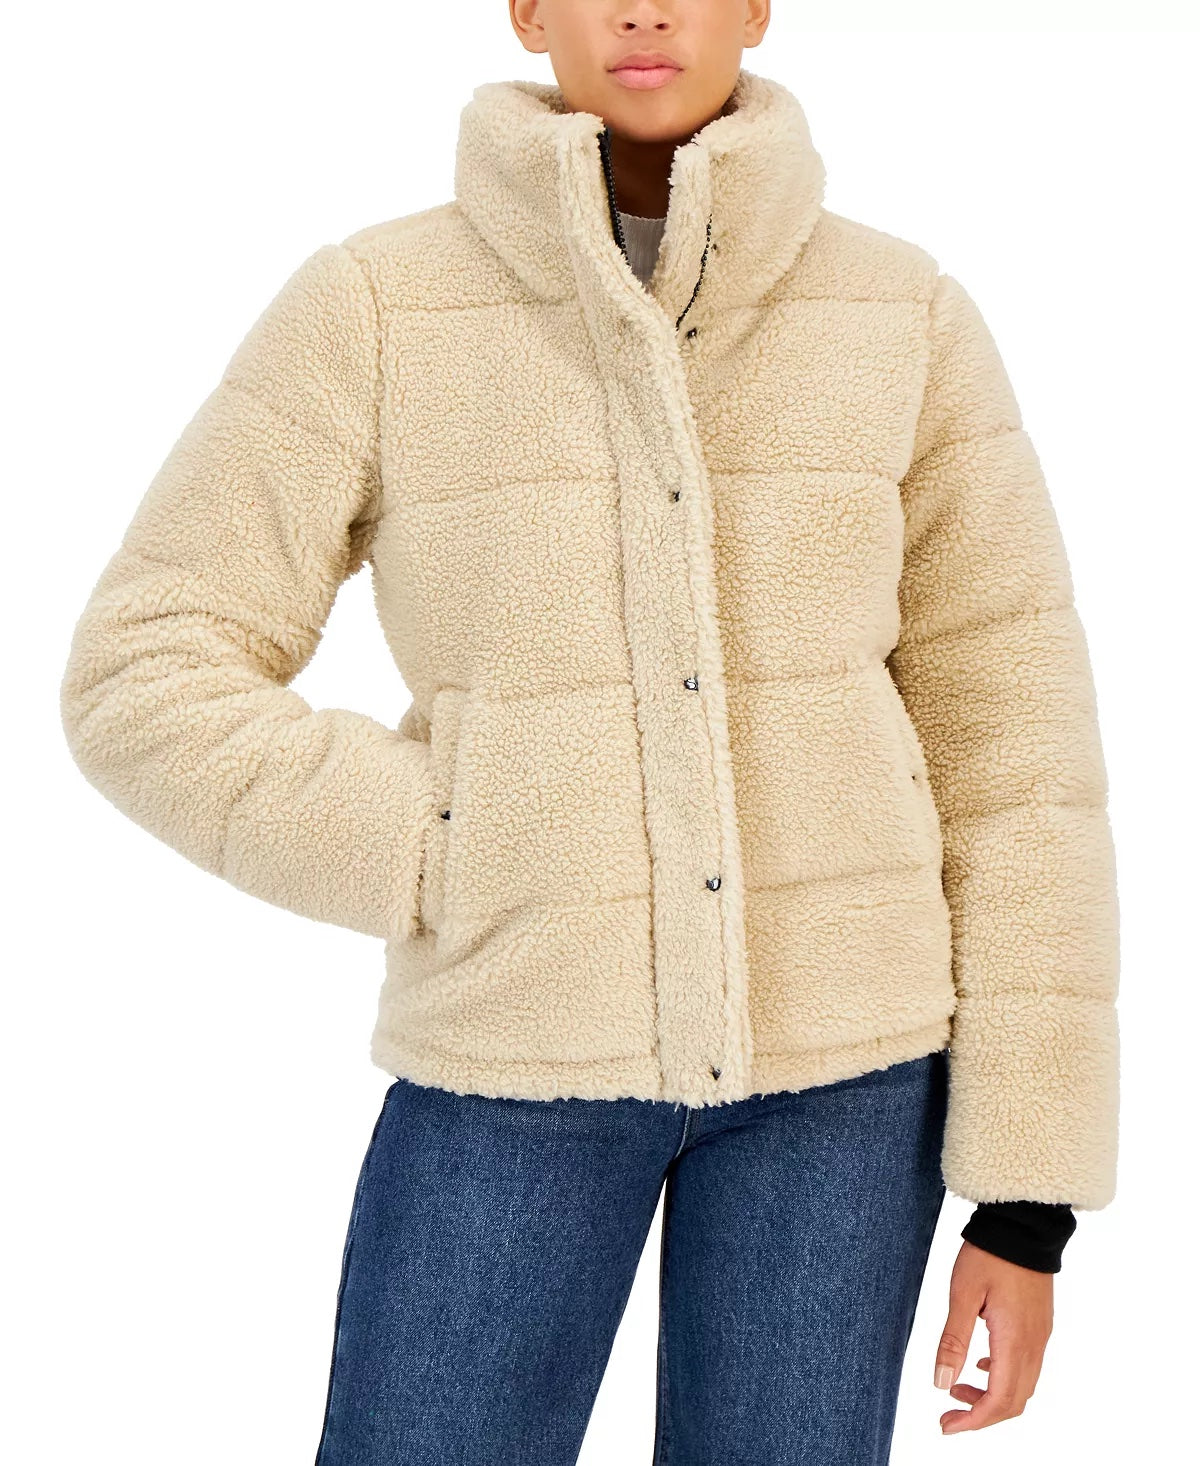 S13 Women's Lily Sherpa Stand-Collar Puffer Coat Large Beige Biscotti Tan